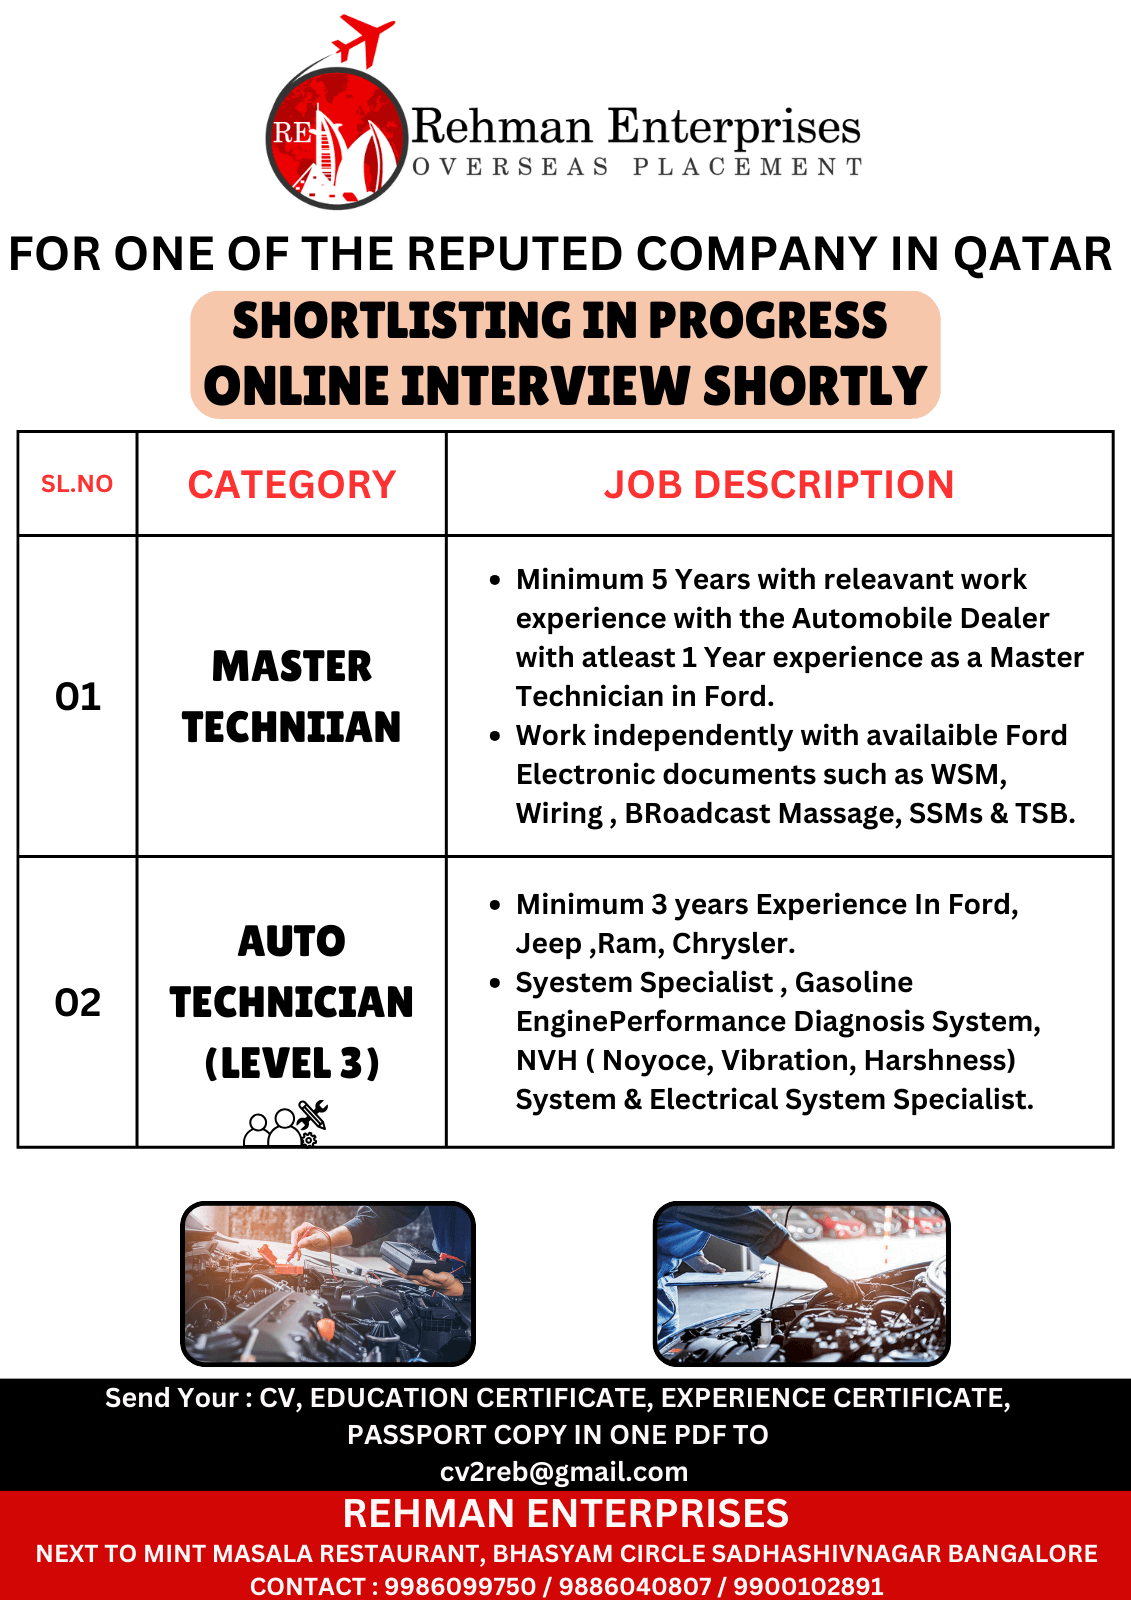 FOR ONE OF THE REPUTED COMPANY IN QATAR